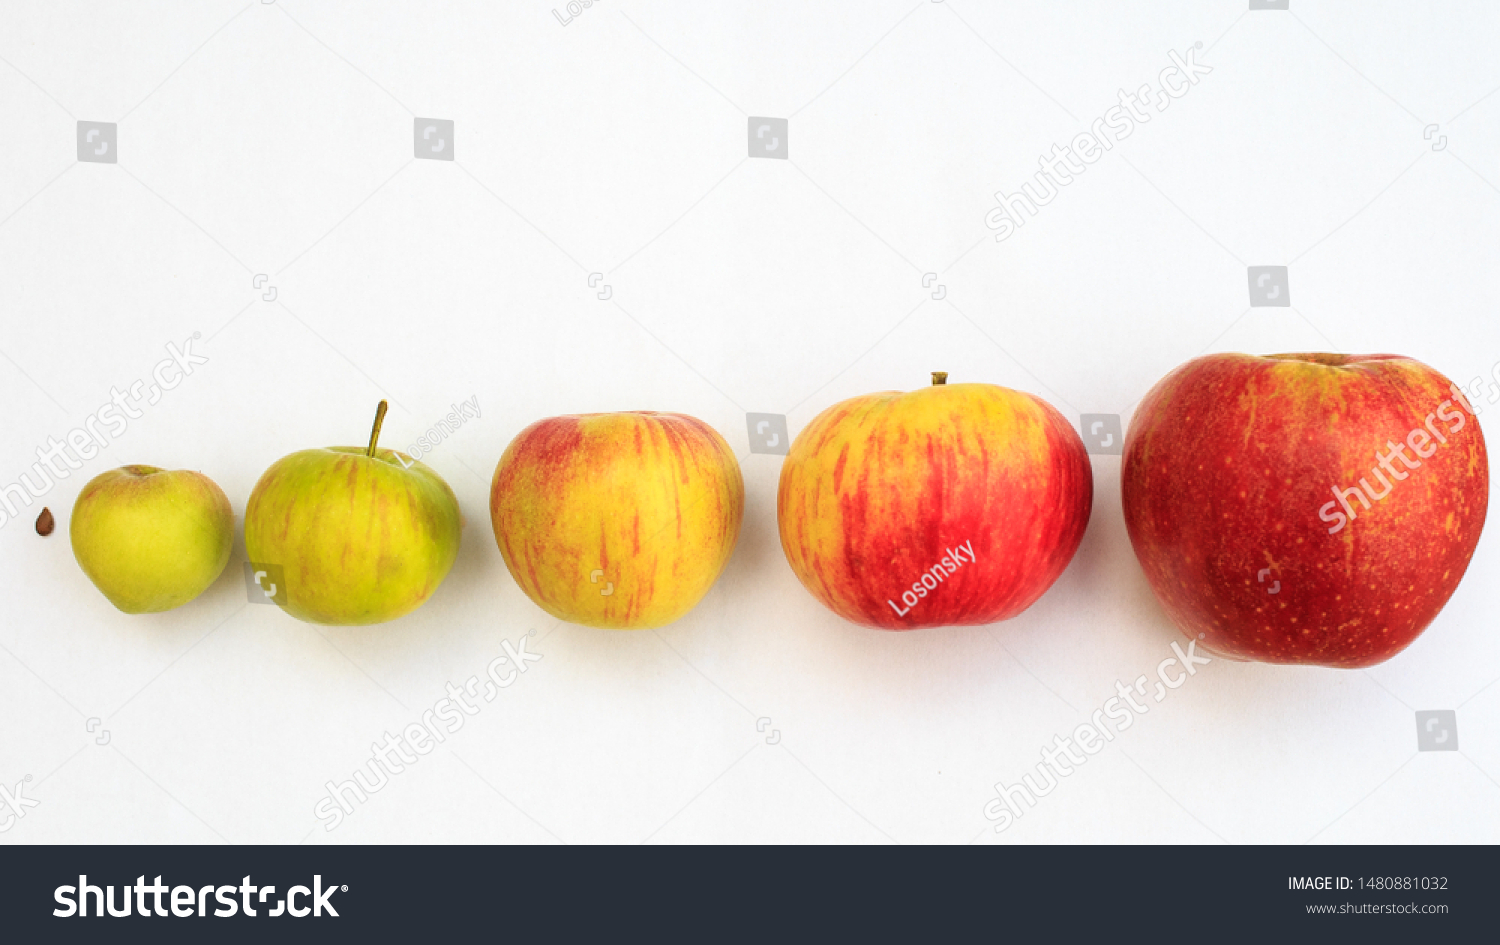 from idea to realization, Symbolism with ripening apples #1480881032